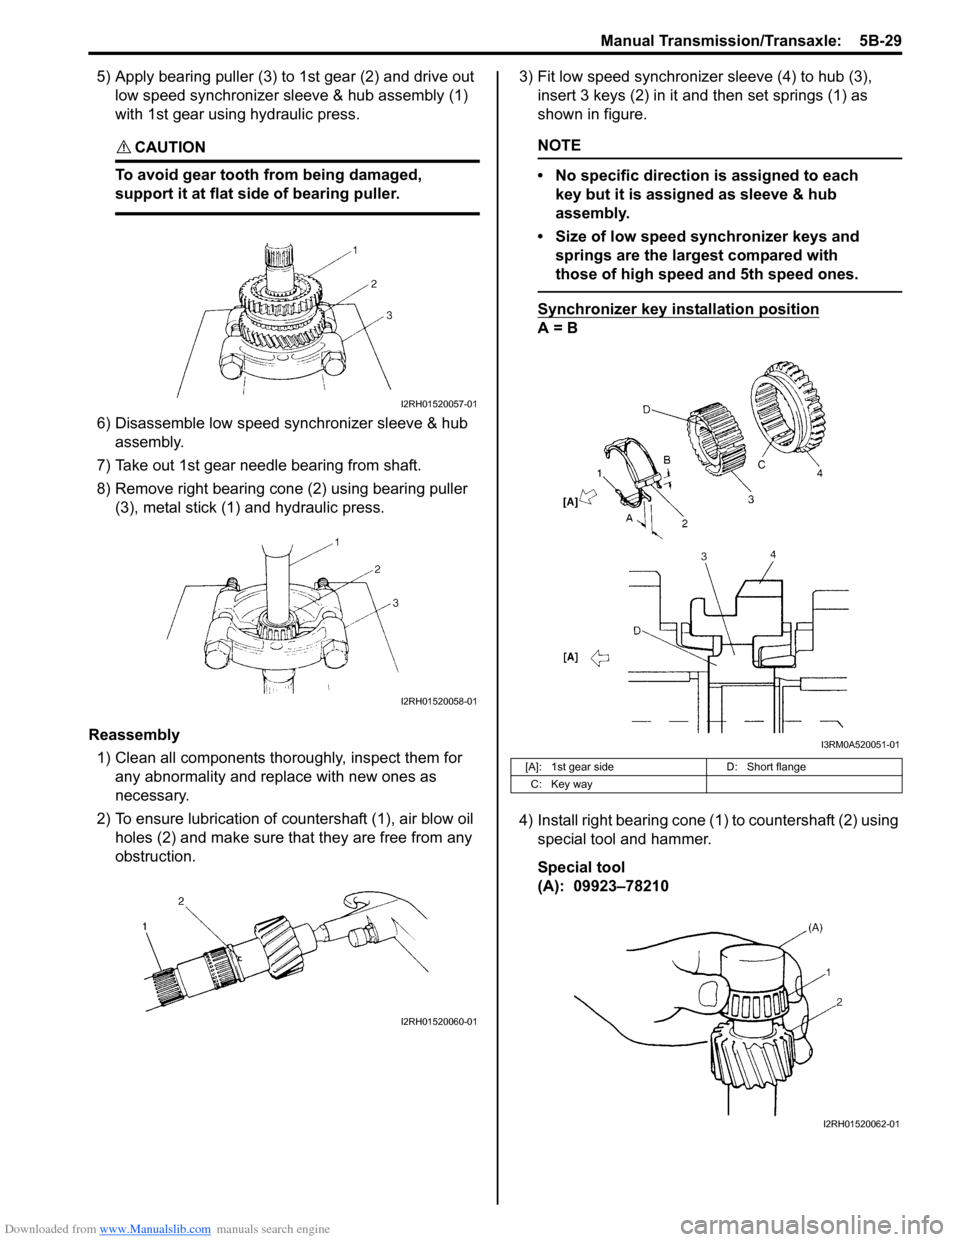 SUZUKI SWIFT 2008 2.G Service Workshop Manual Downloaded from www.Manualslib.com manuals search engine Manual Transmission/Transaxle:  5B-29
5) Apply bearing puller (3) to 1st gear (2) and drive out low speed synchronizer sleeve & hub assembly (1